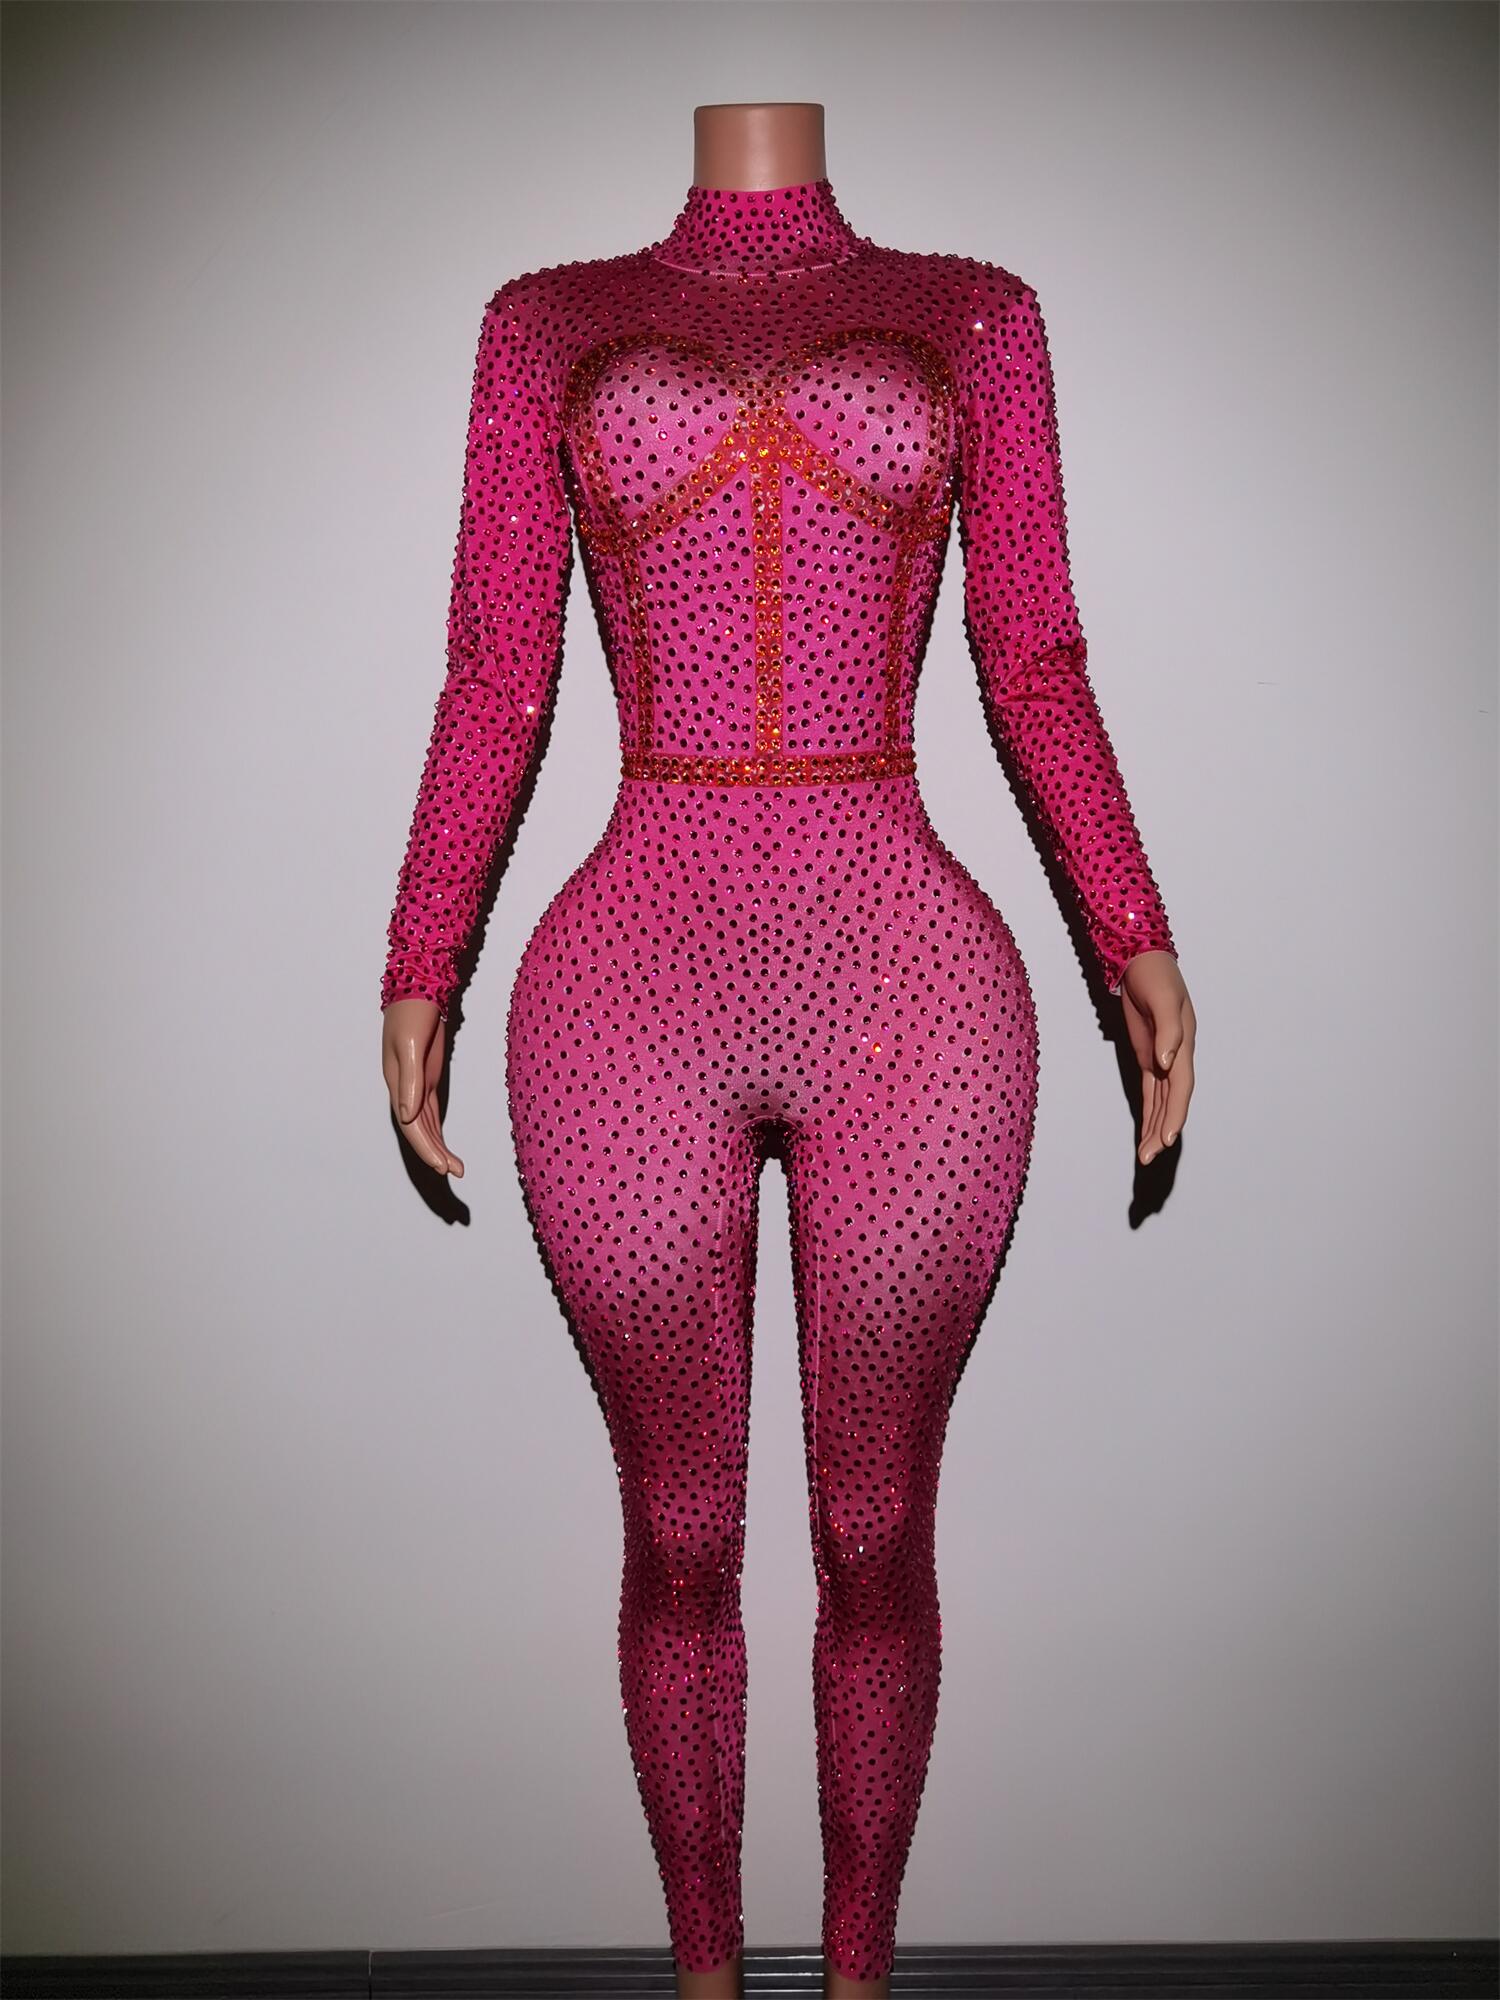 Sparkly Pink Crystals Jumpsuit Women's Sexy Leggings Costume Nightclub Dance Stage Wear Female Singer Stretch Outfit